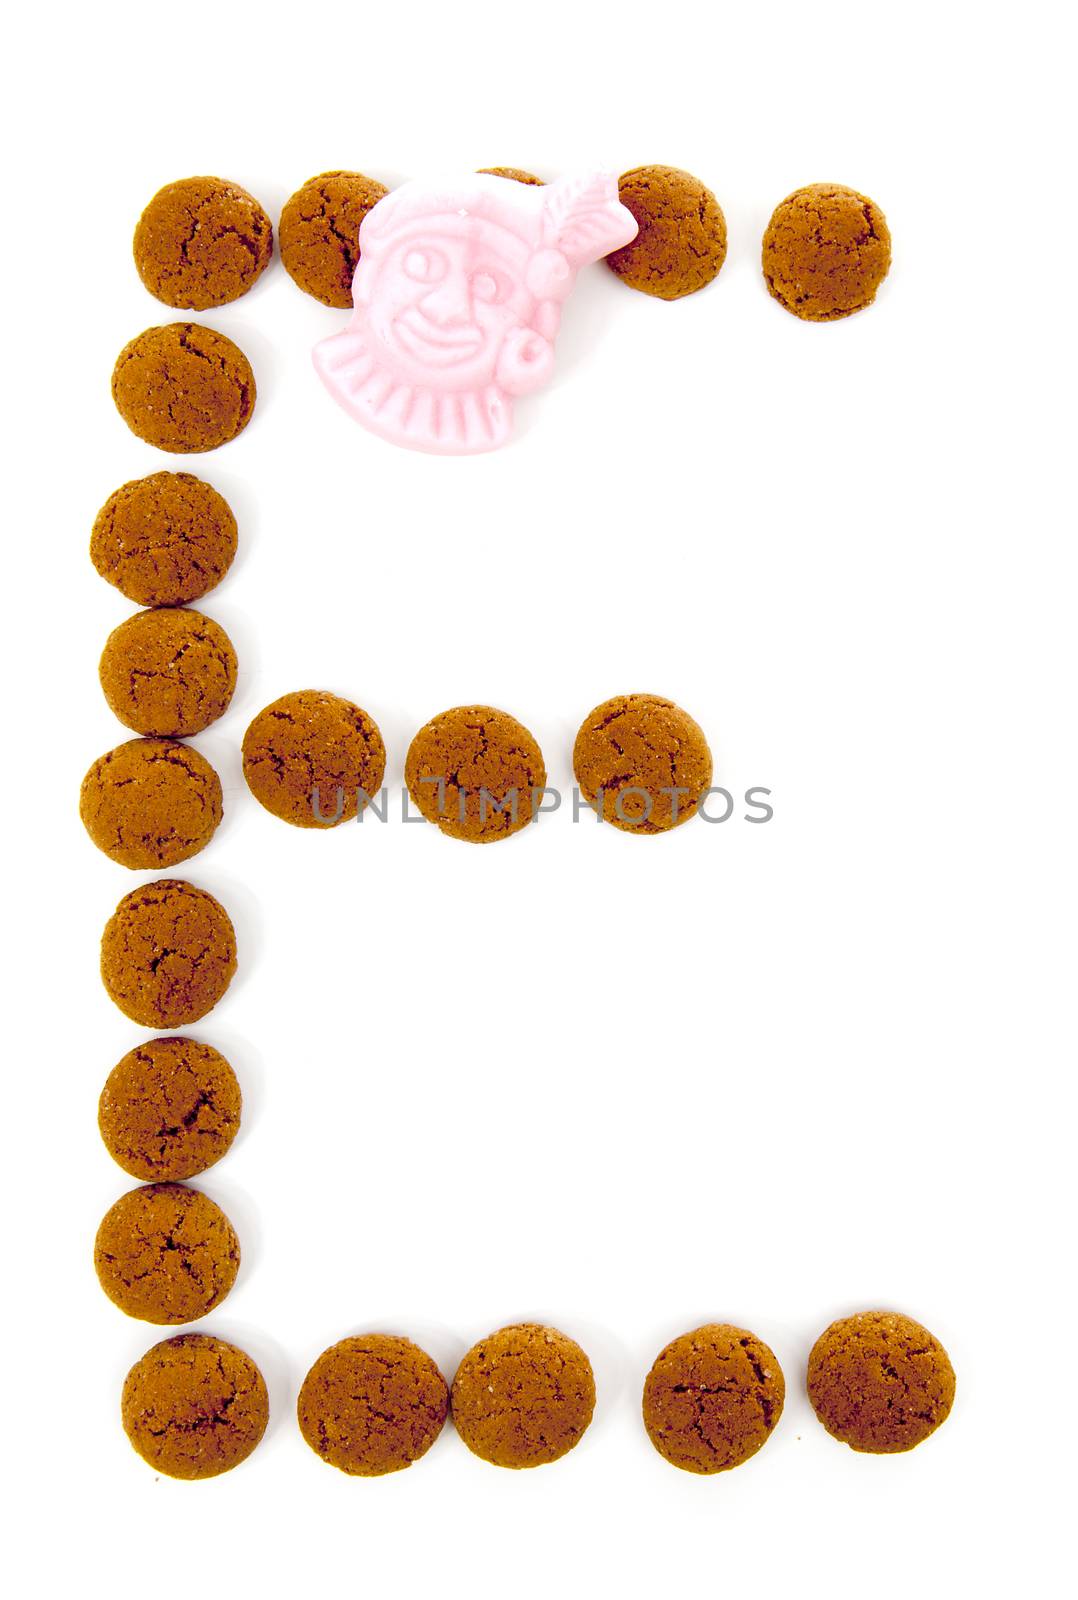 Ginger nuts, pepernoten, in the shape of letter E isolated on white background. Typical Dutch candy for Sinterklaas event in december